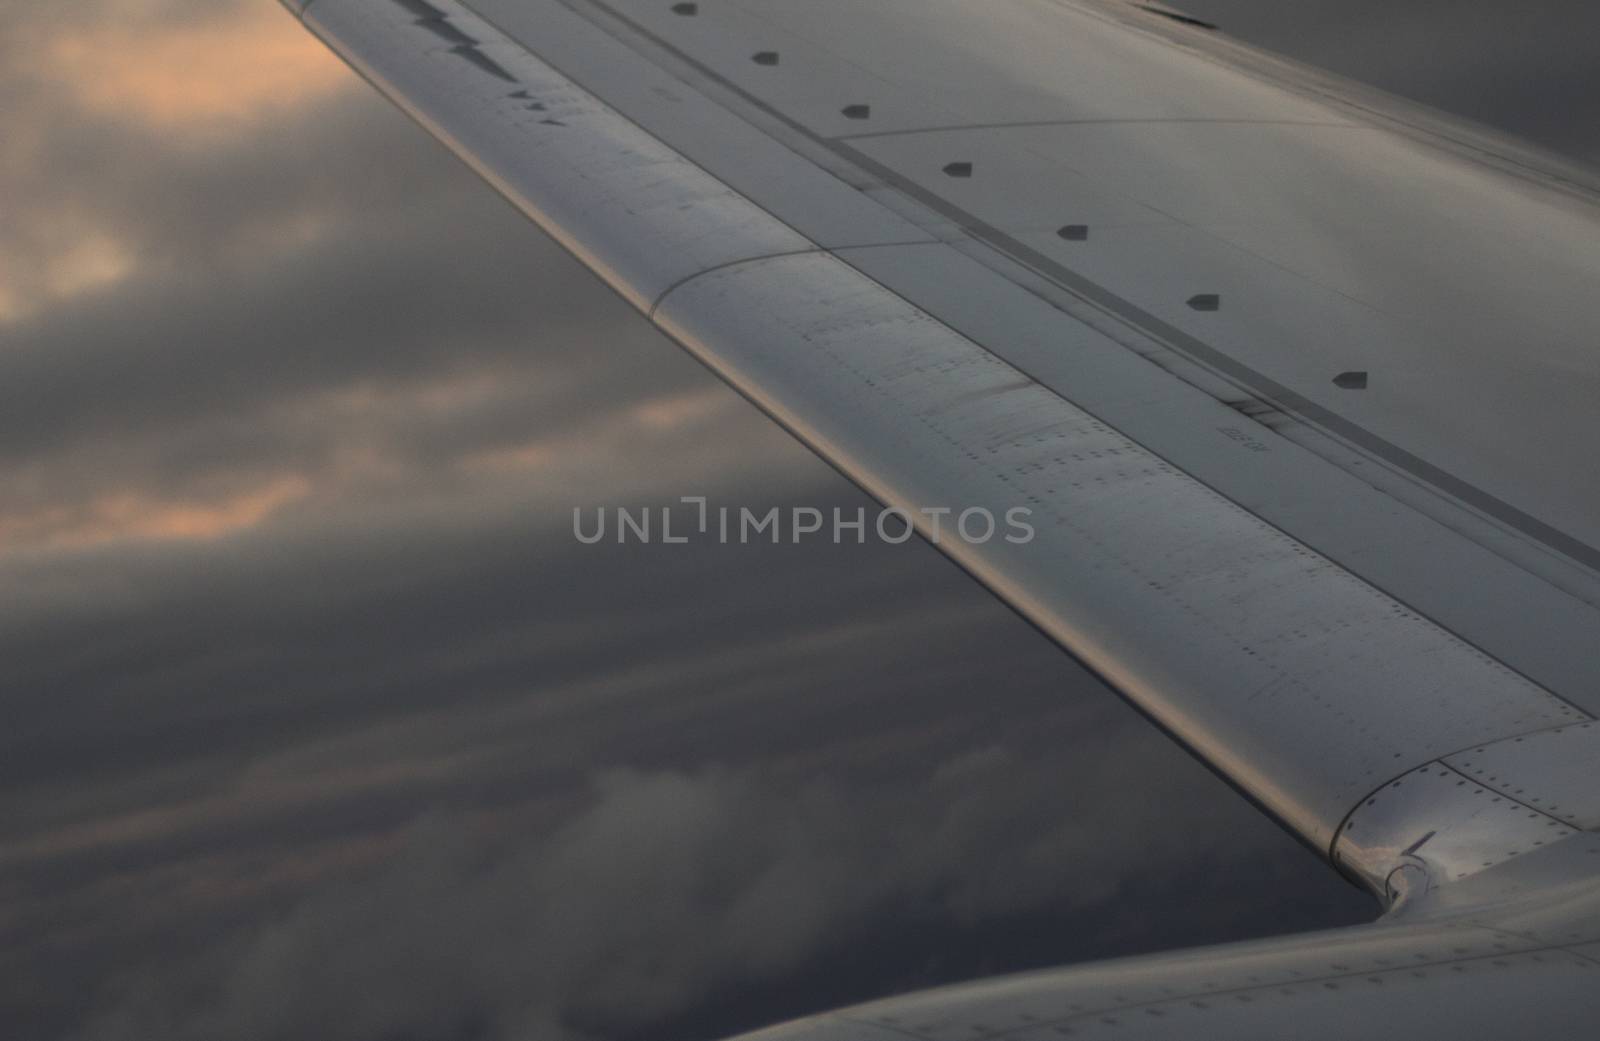 Airplane flying in sky wing in flight by edwardolive